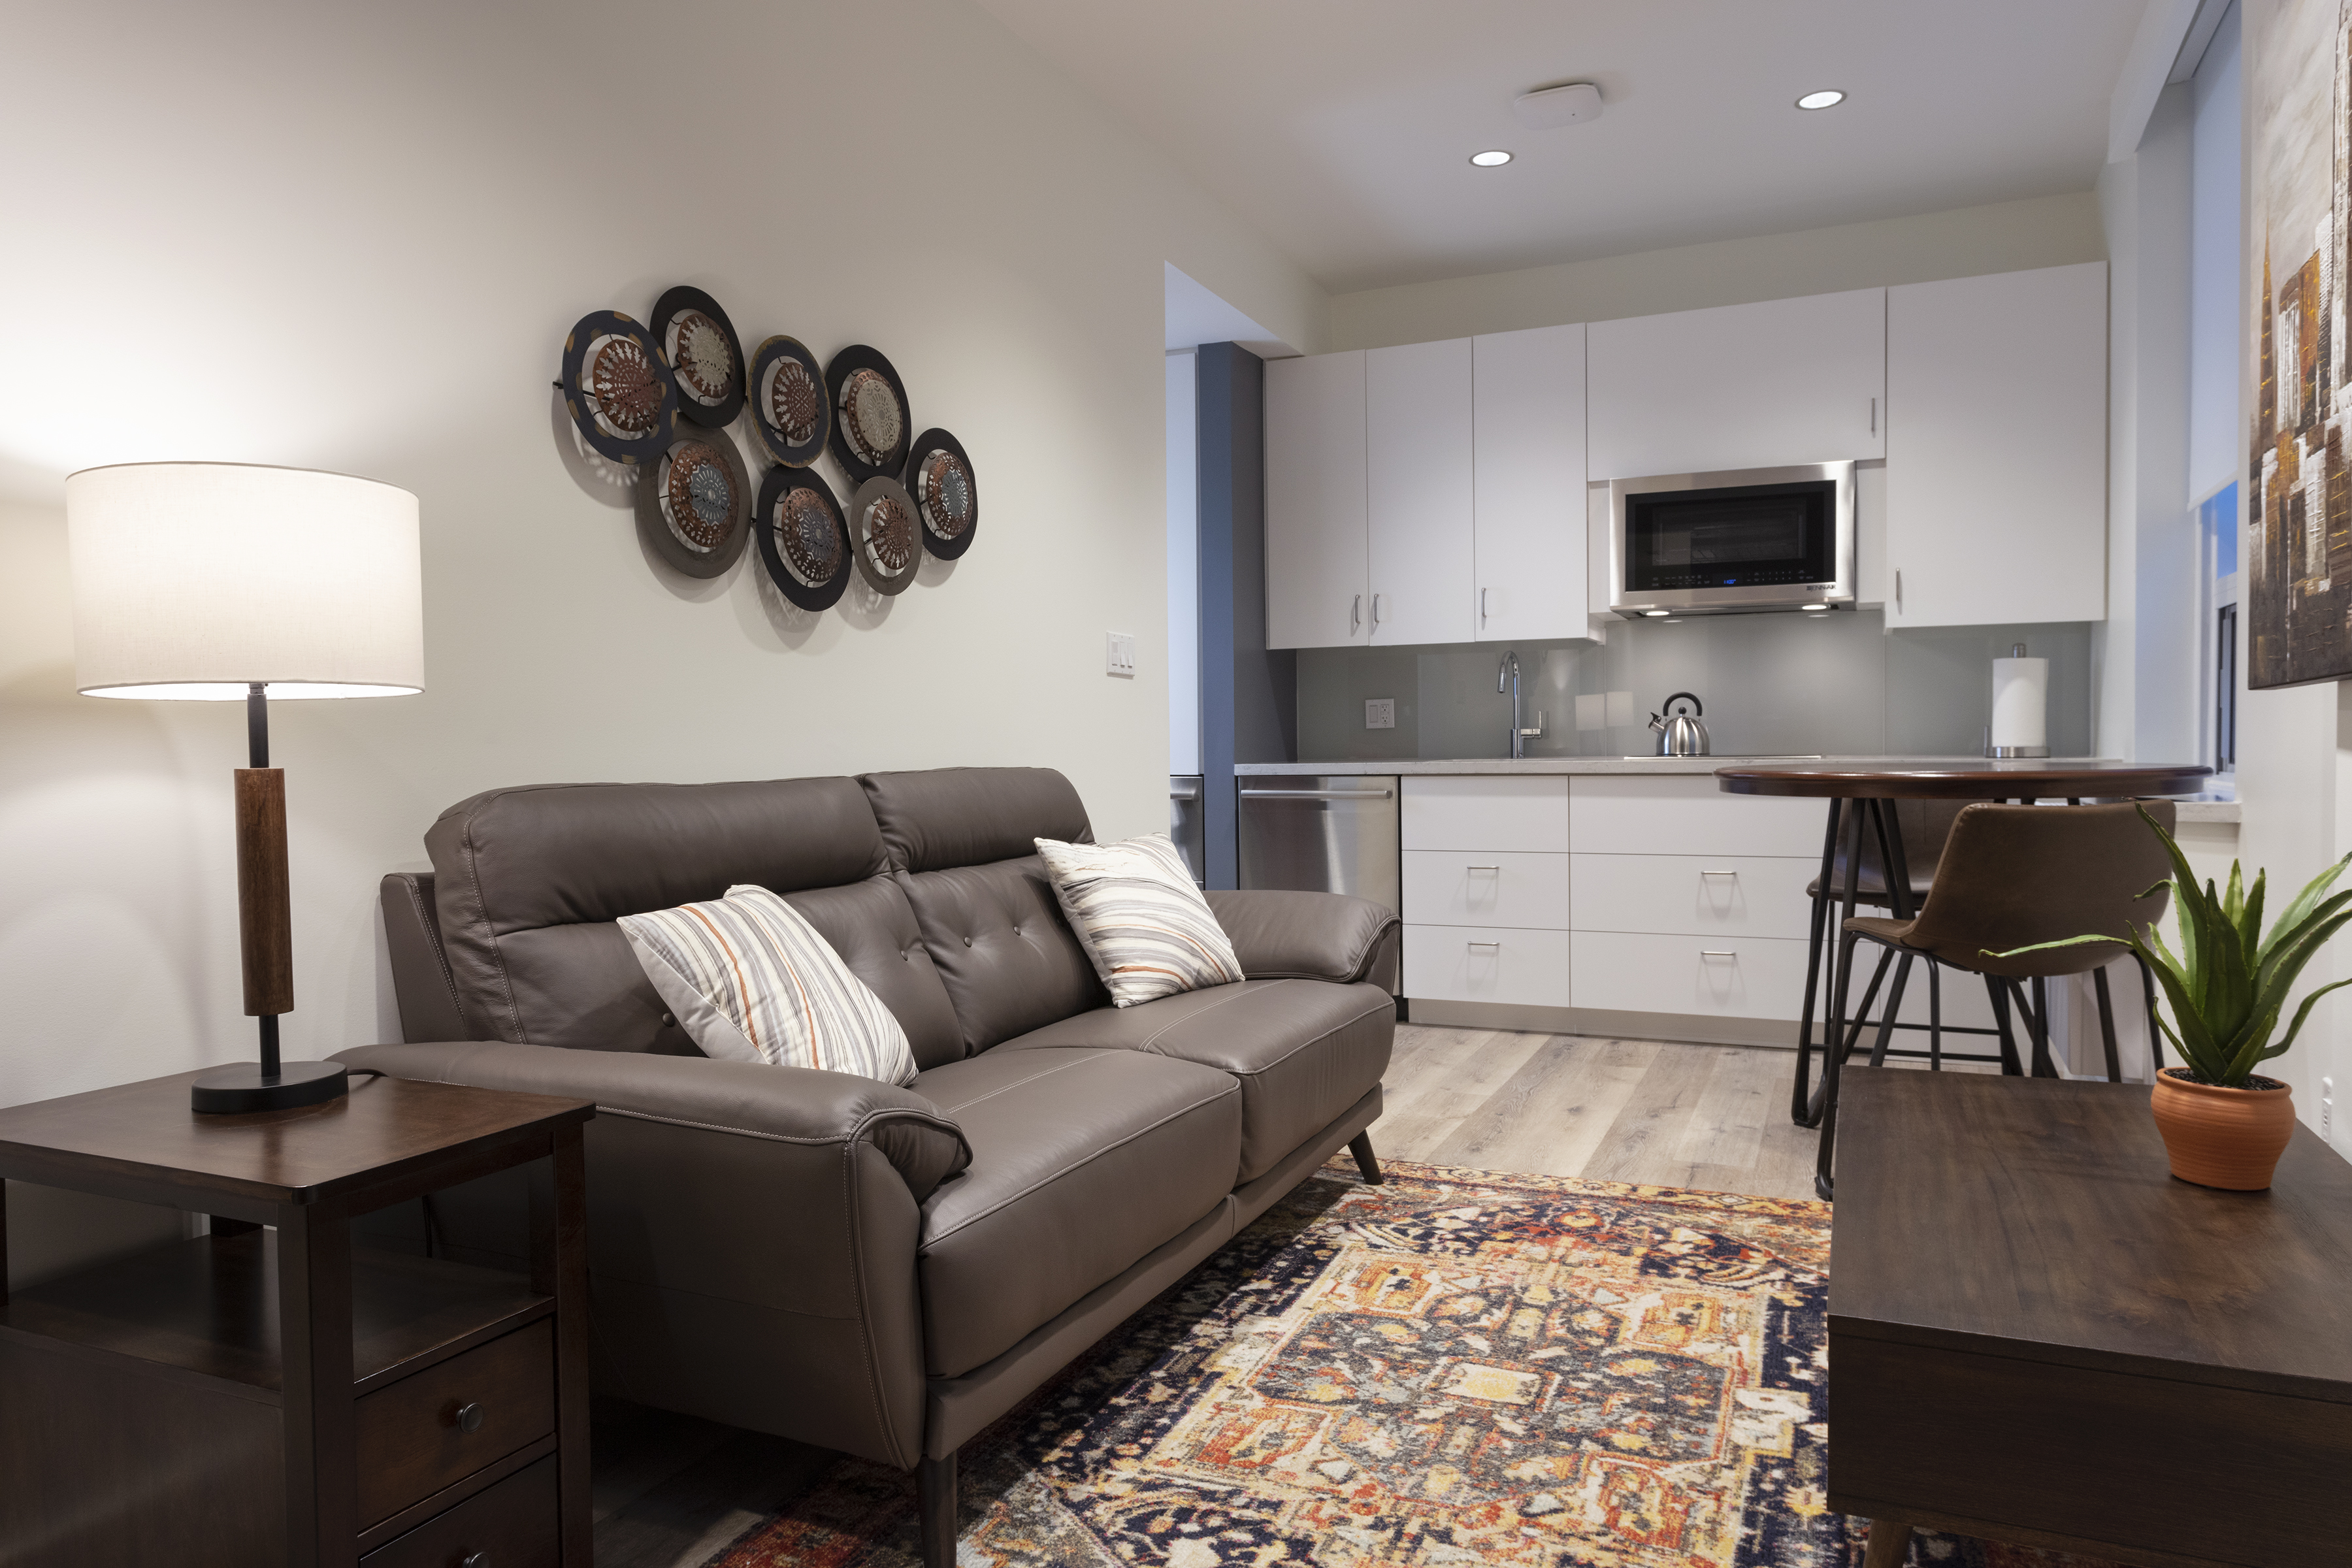 The Mulberry living room and kitchenette